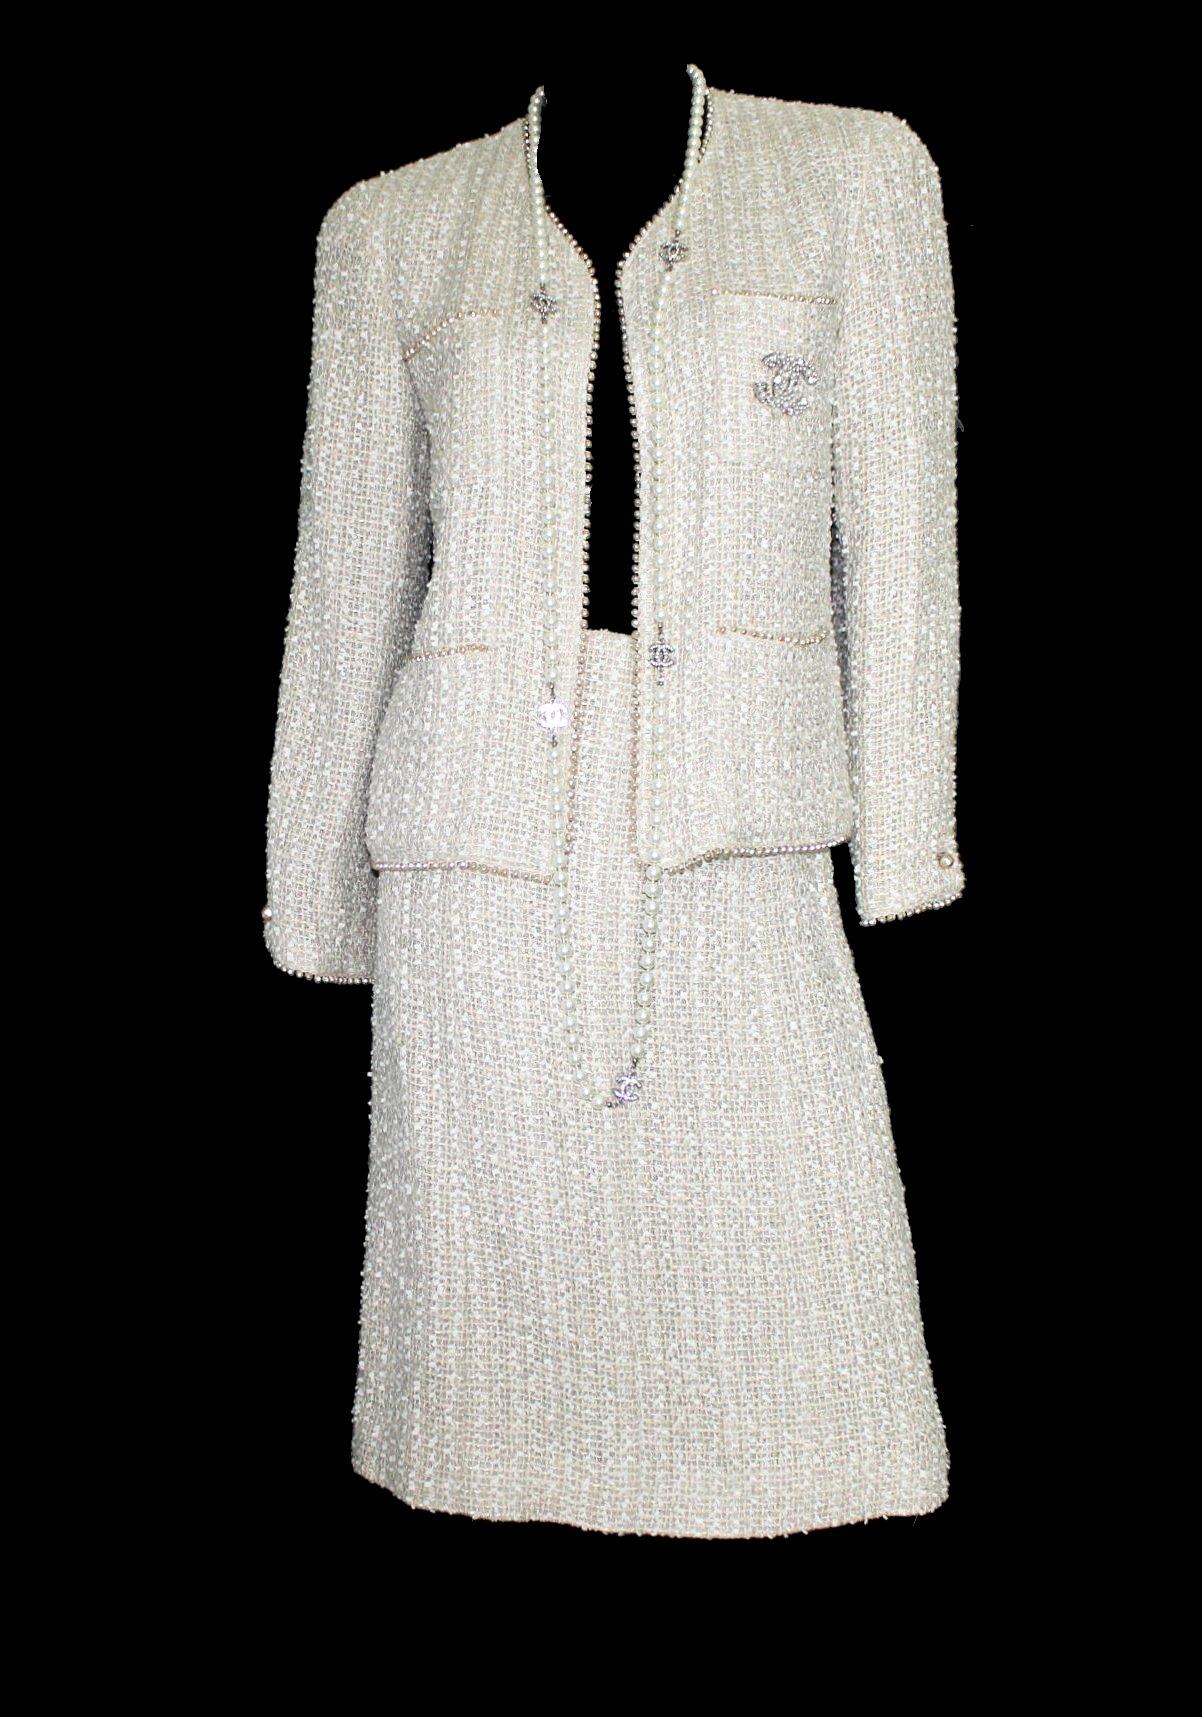 CHANEL Rare Ivory Fantasy Tweed Skirt Suit with Pearl Trimming Details 38 For Sale 1